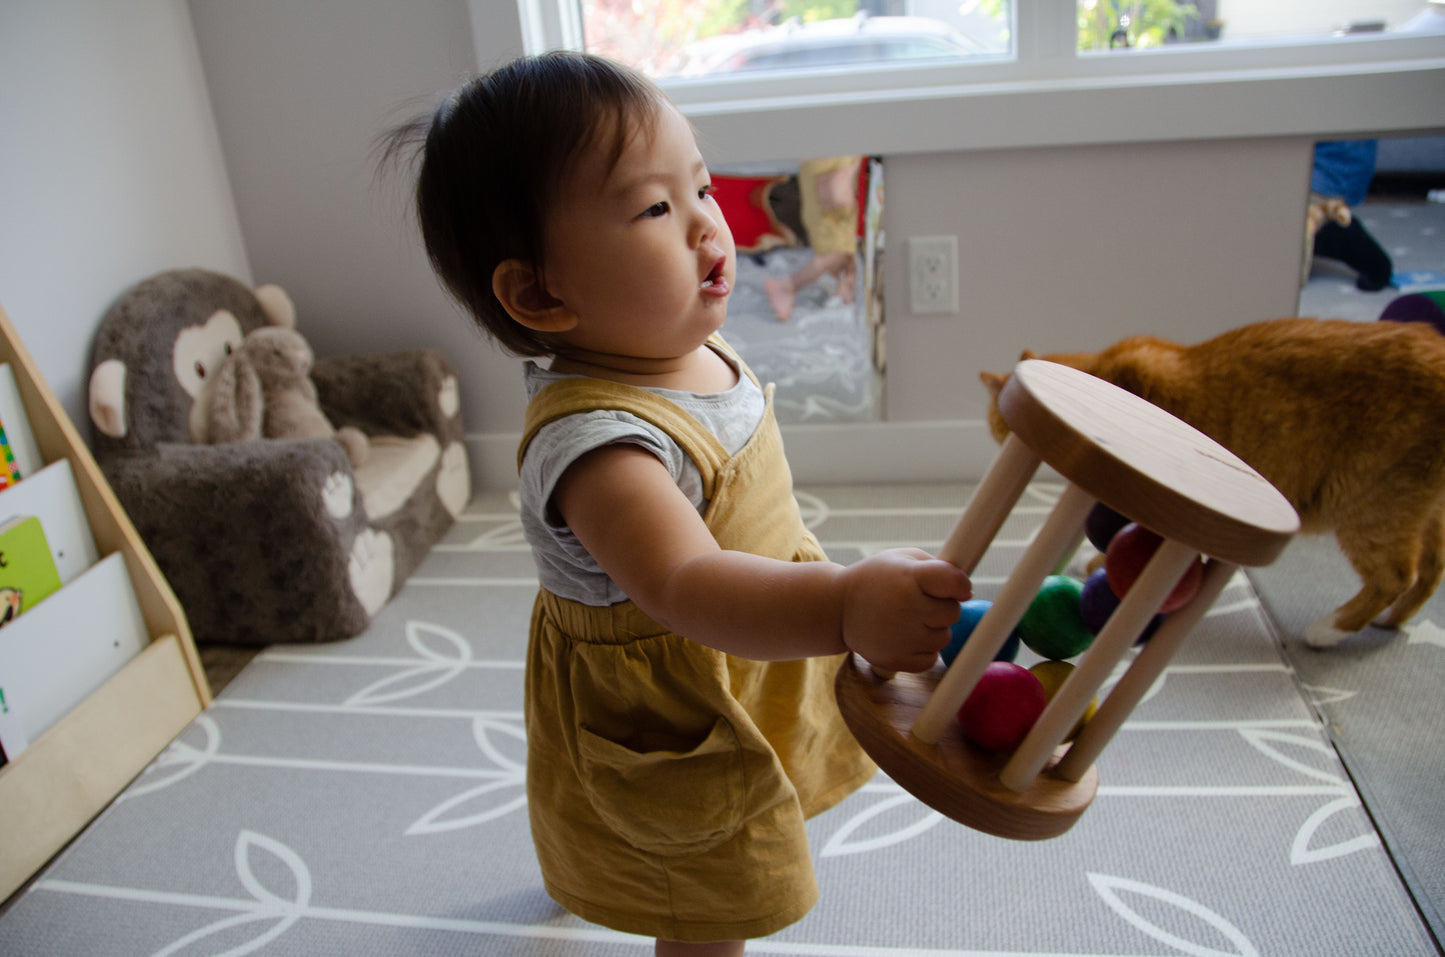 The little girl is happily picking up the Qualitmonti - Color Ball Cylinder toy. With enthusiasm and curiosity, she explores the colorful balls and the cylinder, captivated by the tactile and sensory experience the toy offers. As she engages with the different elements, she enhances her fine motor skills, hand-eye coordination, and color recognition. This interactive playtime encourages her learning and creativity while providing endless fun and exploration.